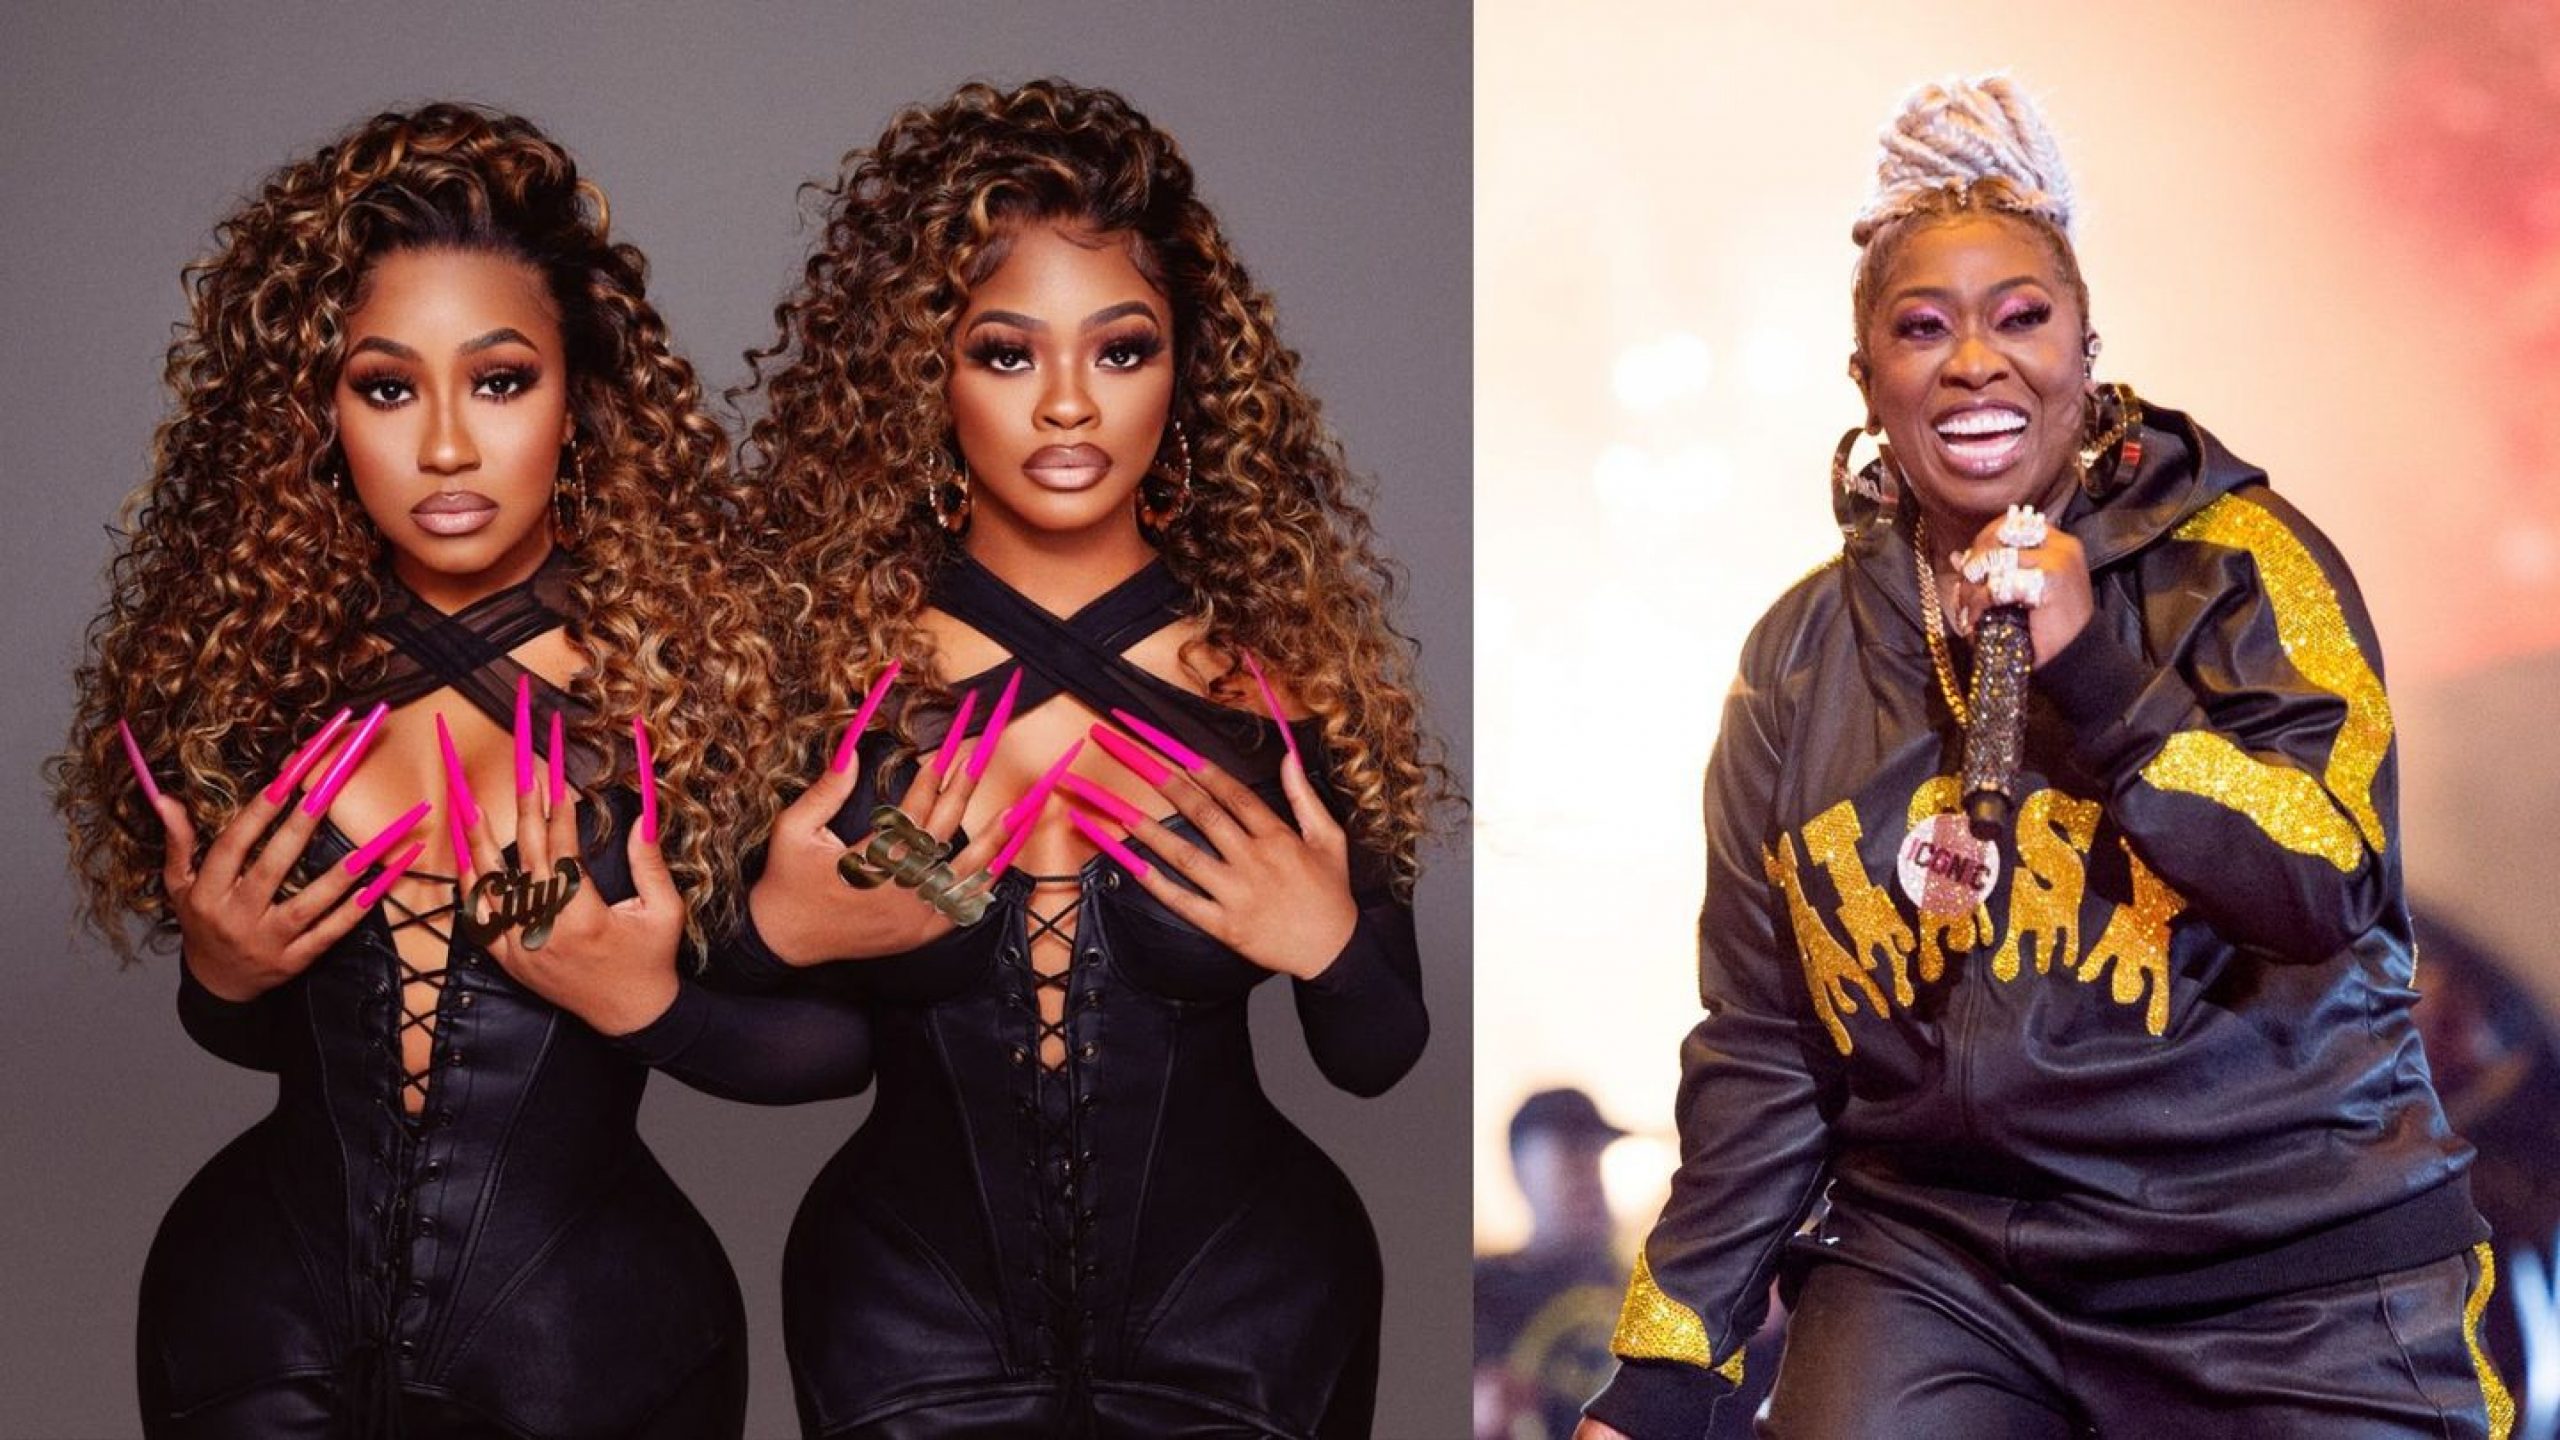 City Girls Stage A Twerk Takeover In New Video Directed By Missy Elliott